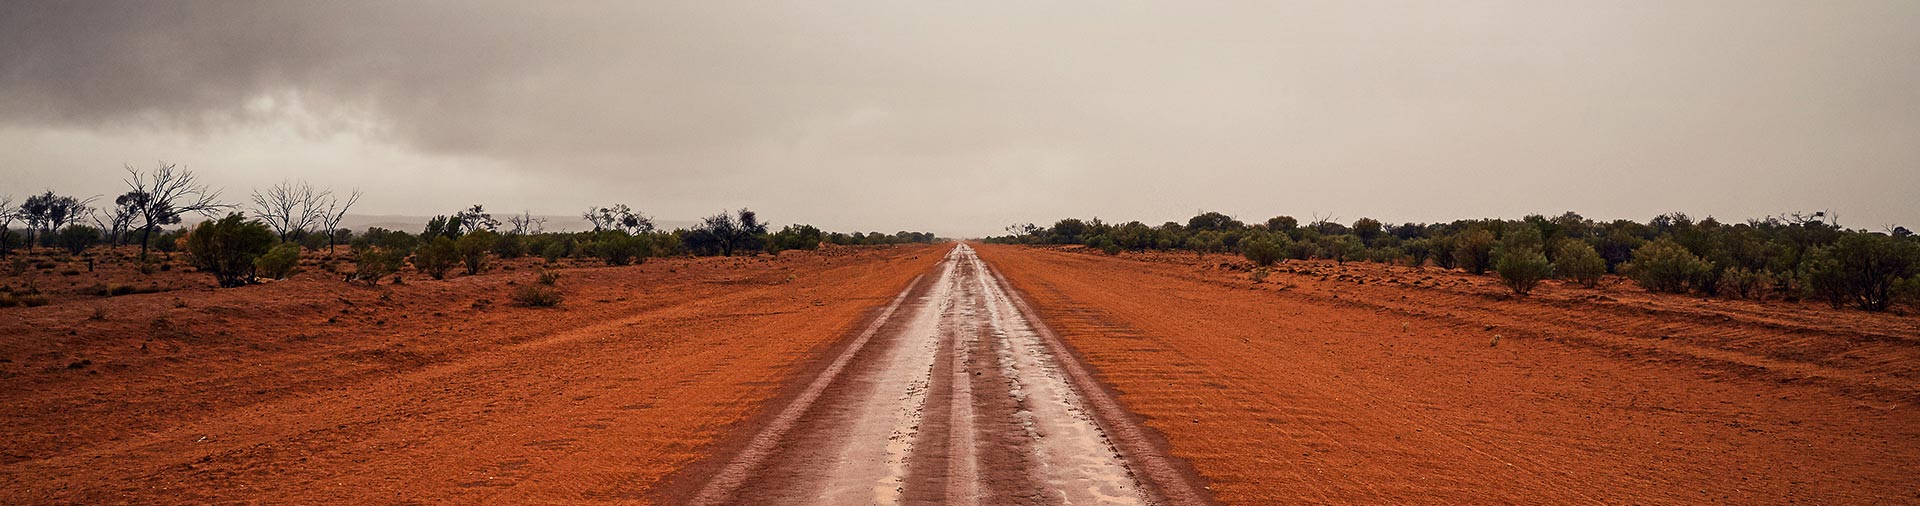 Image by Sean Izzard of a dirt road on an overcast day, exhibited as a part of This Time Its Personal at SUNSTUDIOS 2019